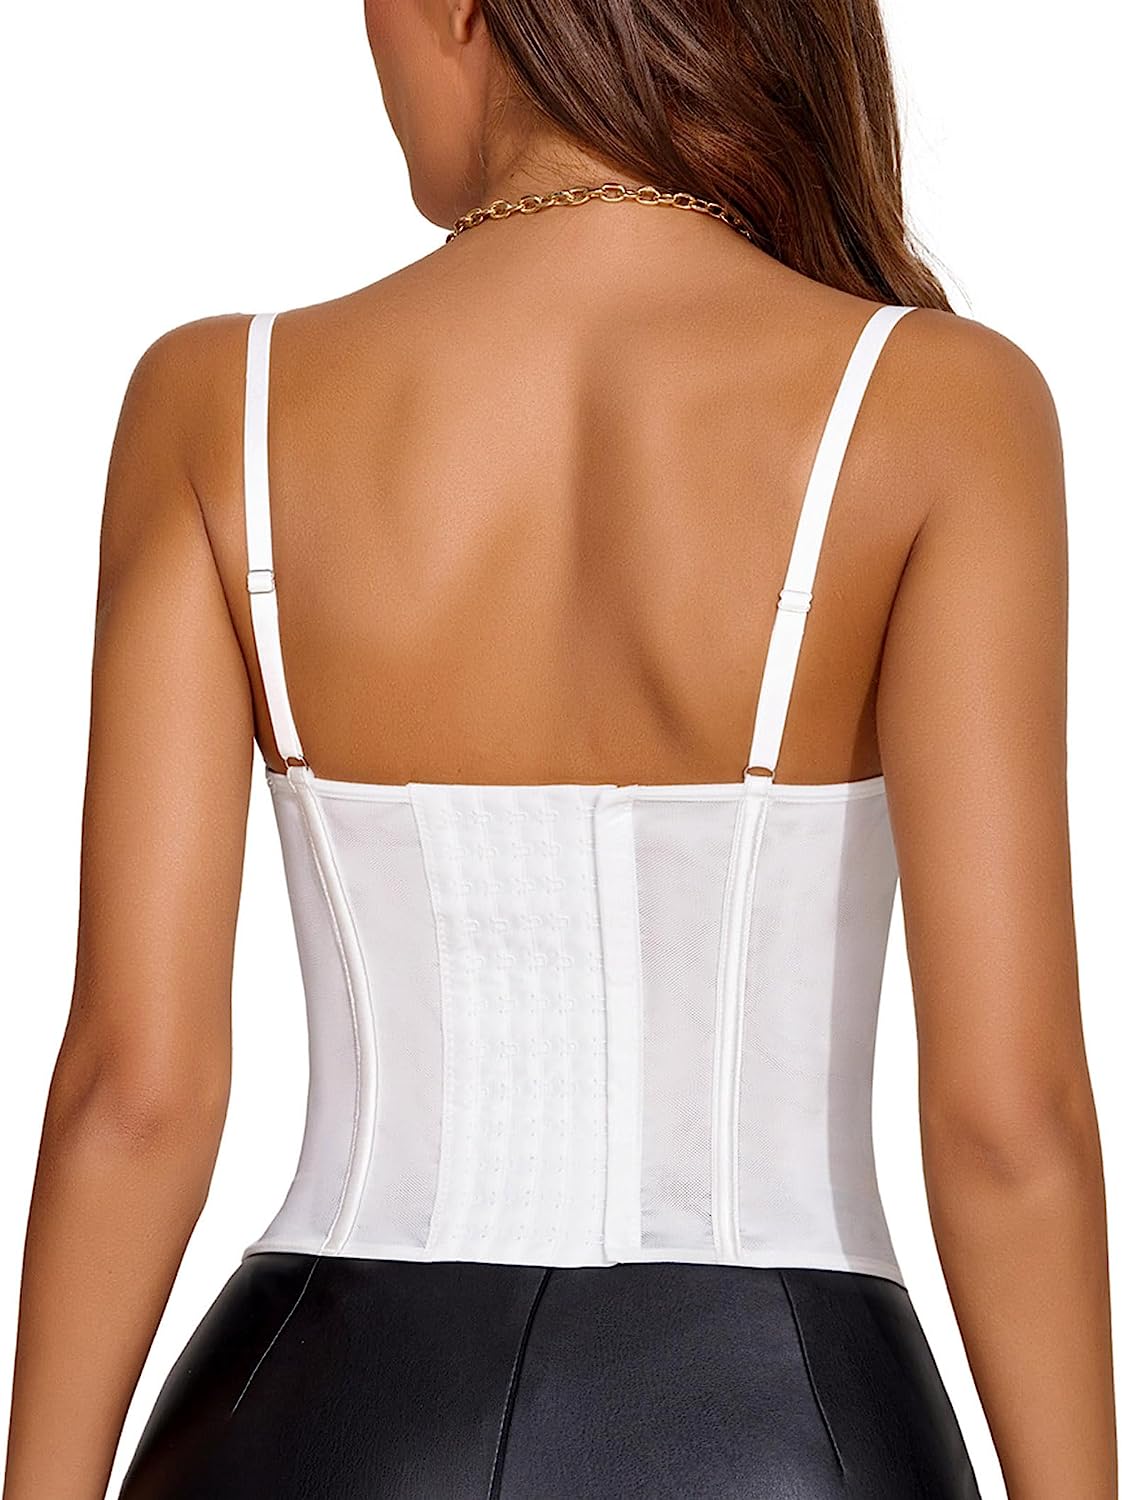 Avidlove Lace Corset Top Corset Tops Bustier Tops for Going Out Vintage Spaghetti Strap Party